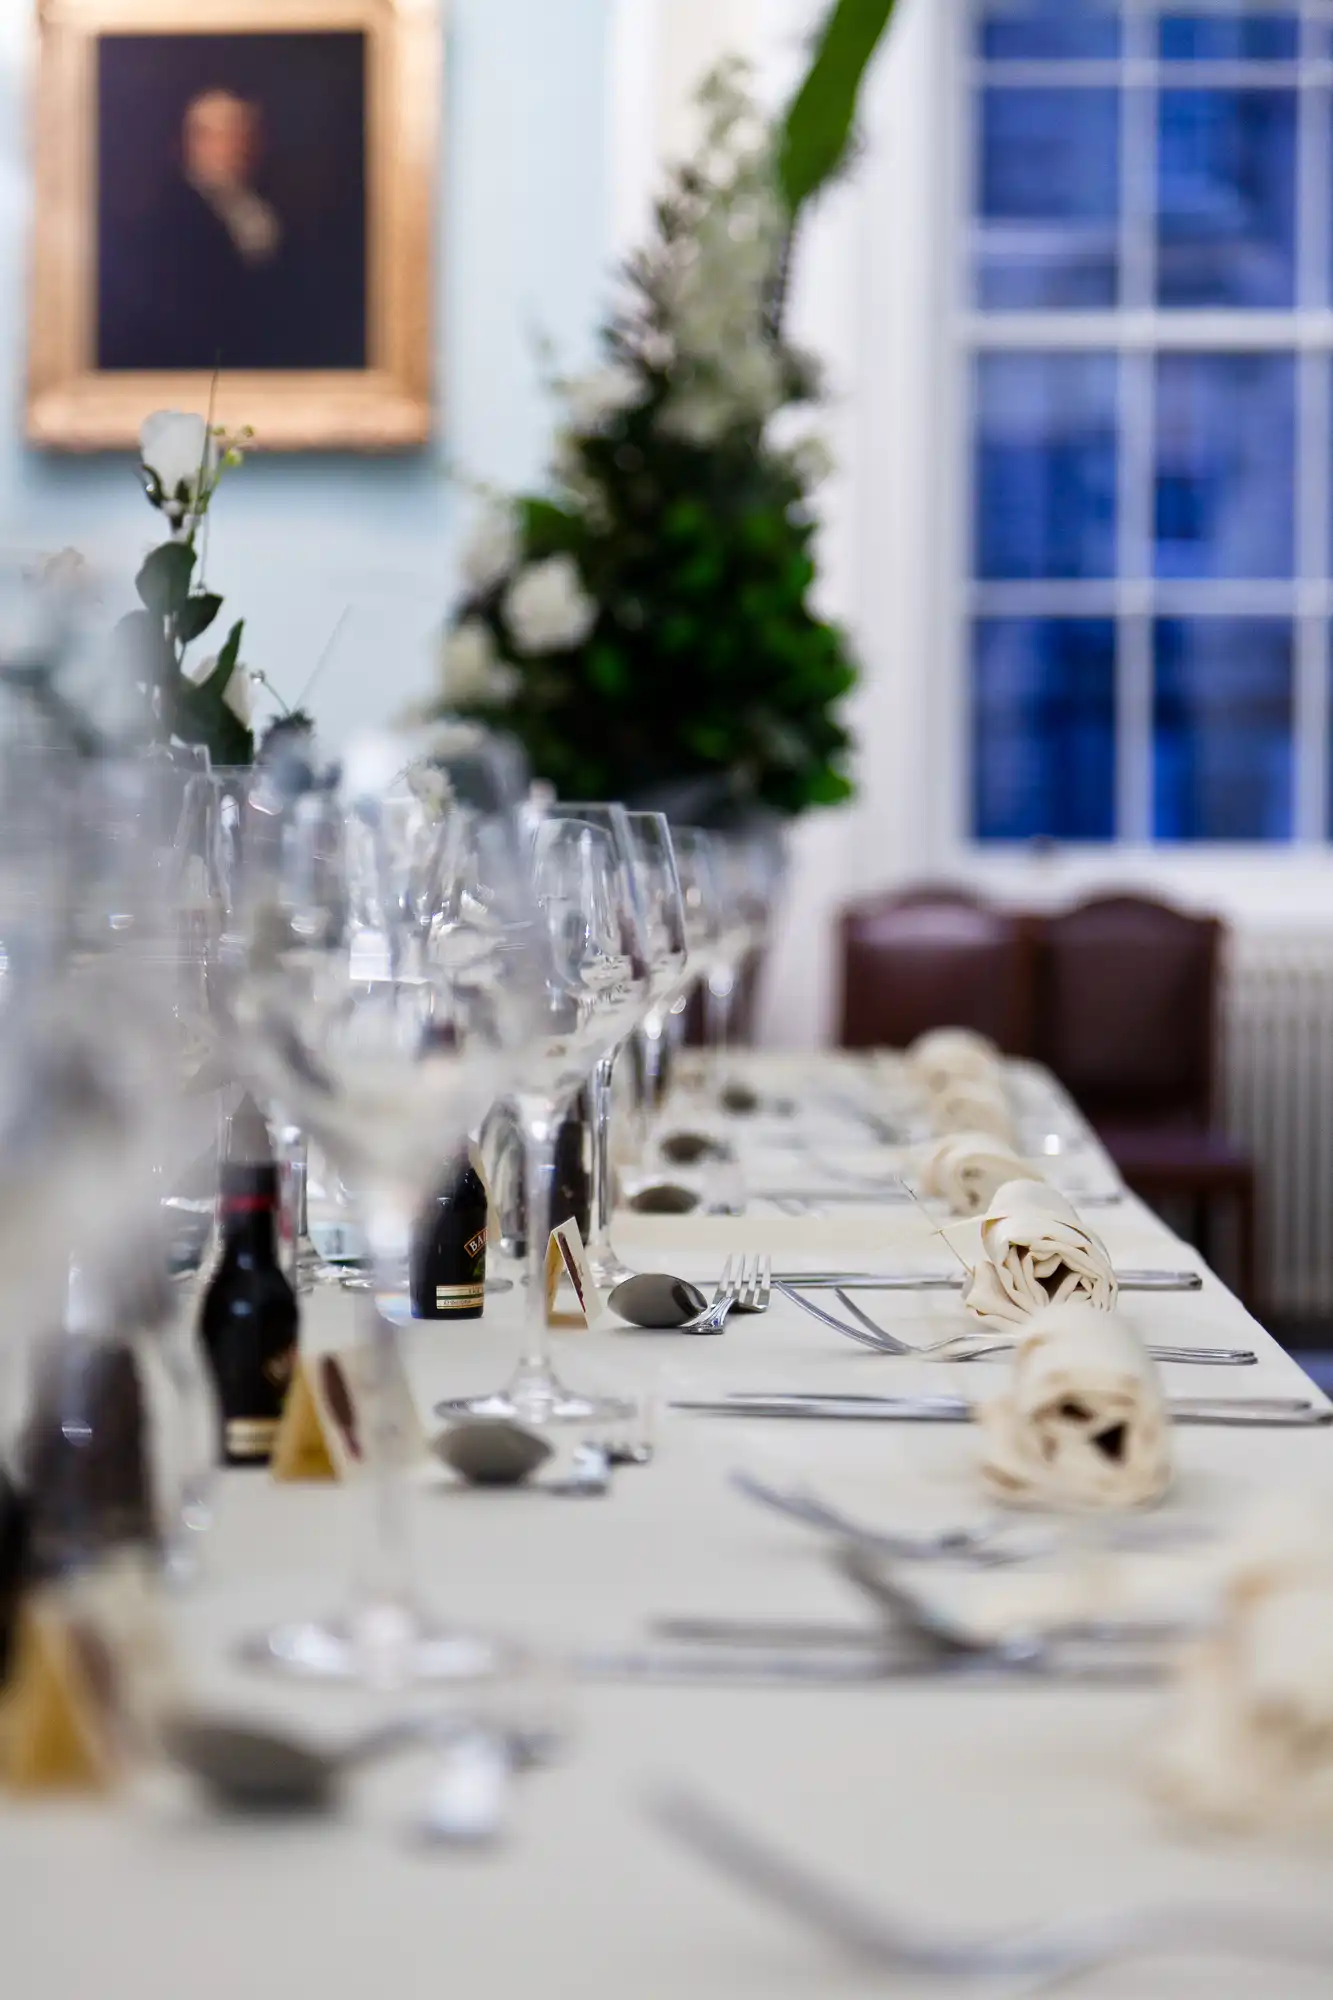 Elegant dining table set for a banquet with wine glasses, plates, and cutlery, featuring a narrow depth of field, with a christmas tree and portrait in the background.